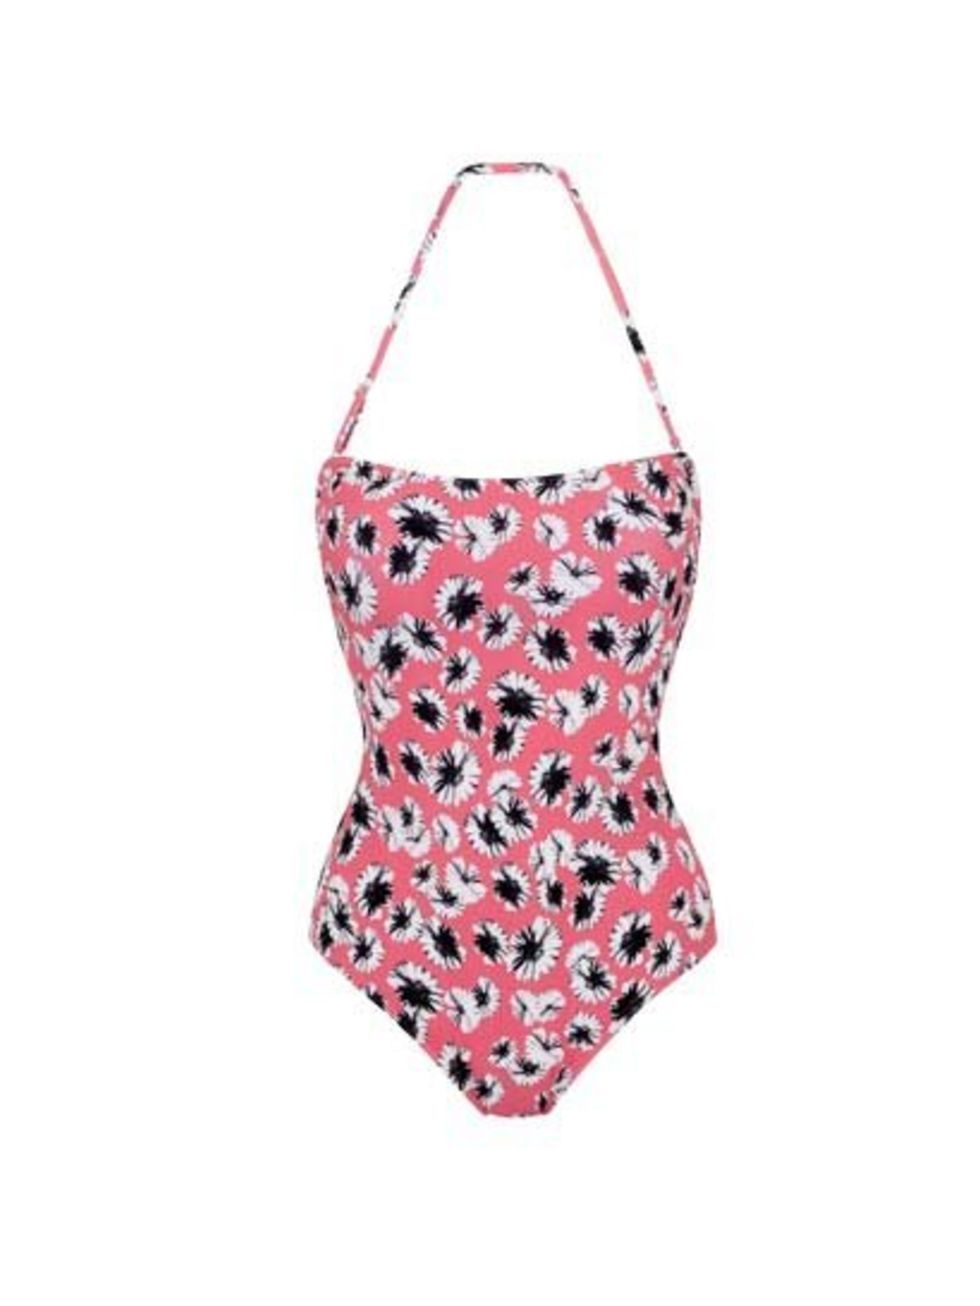 <p>Nod to the 1950's this summer in a retro one-piece. Oversized shades and a wide-brimmed hat optional extras. </p><p>M&amp;S swimsuit, £35</p>